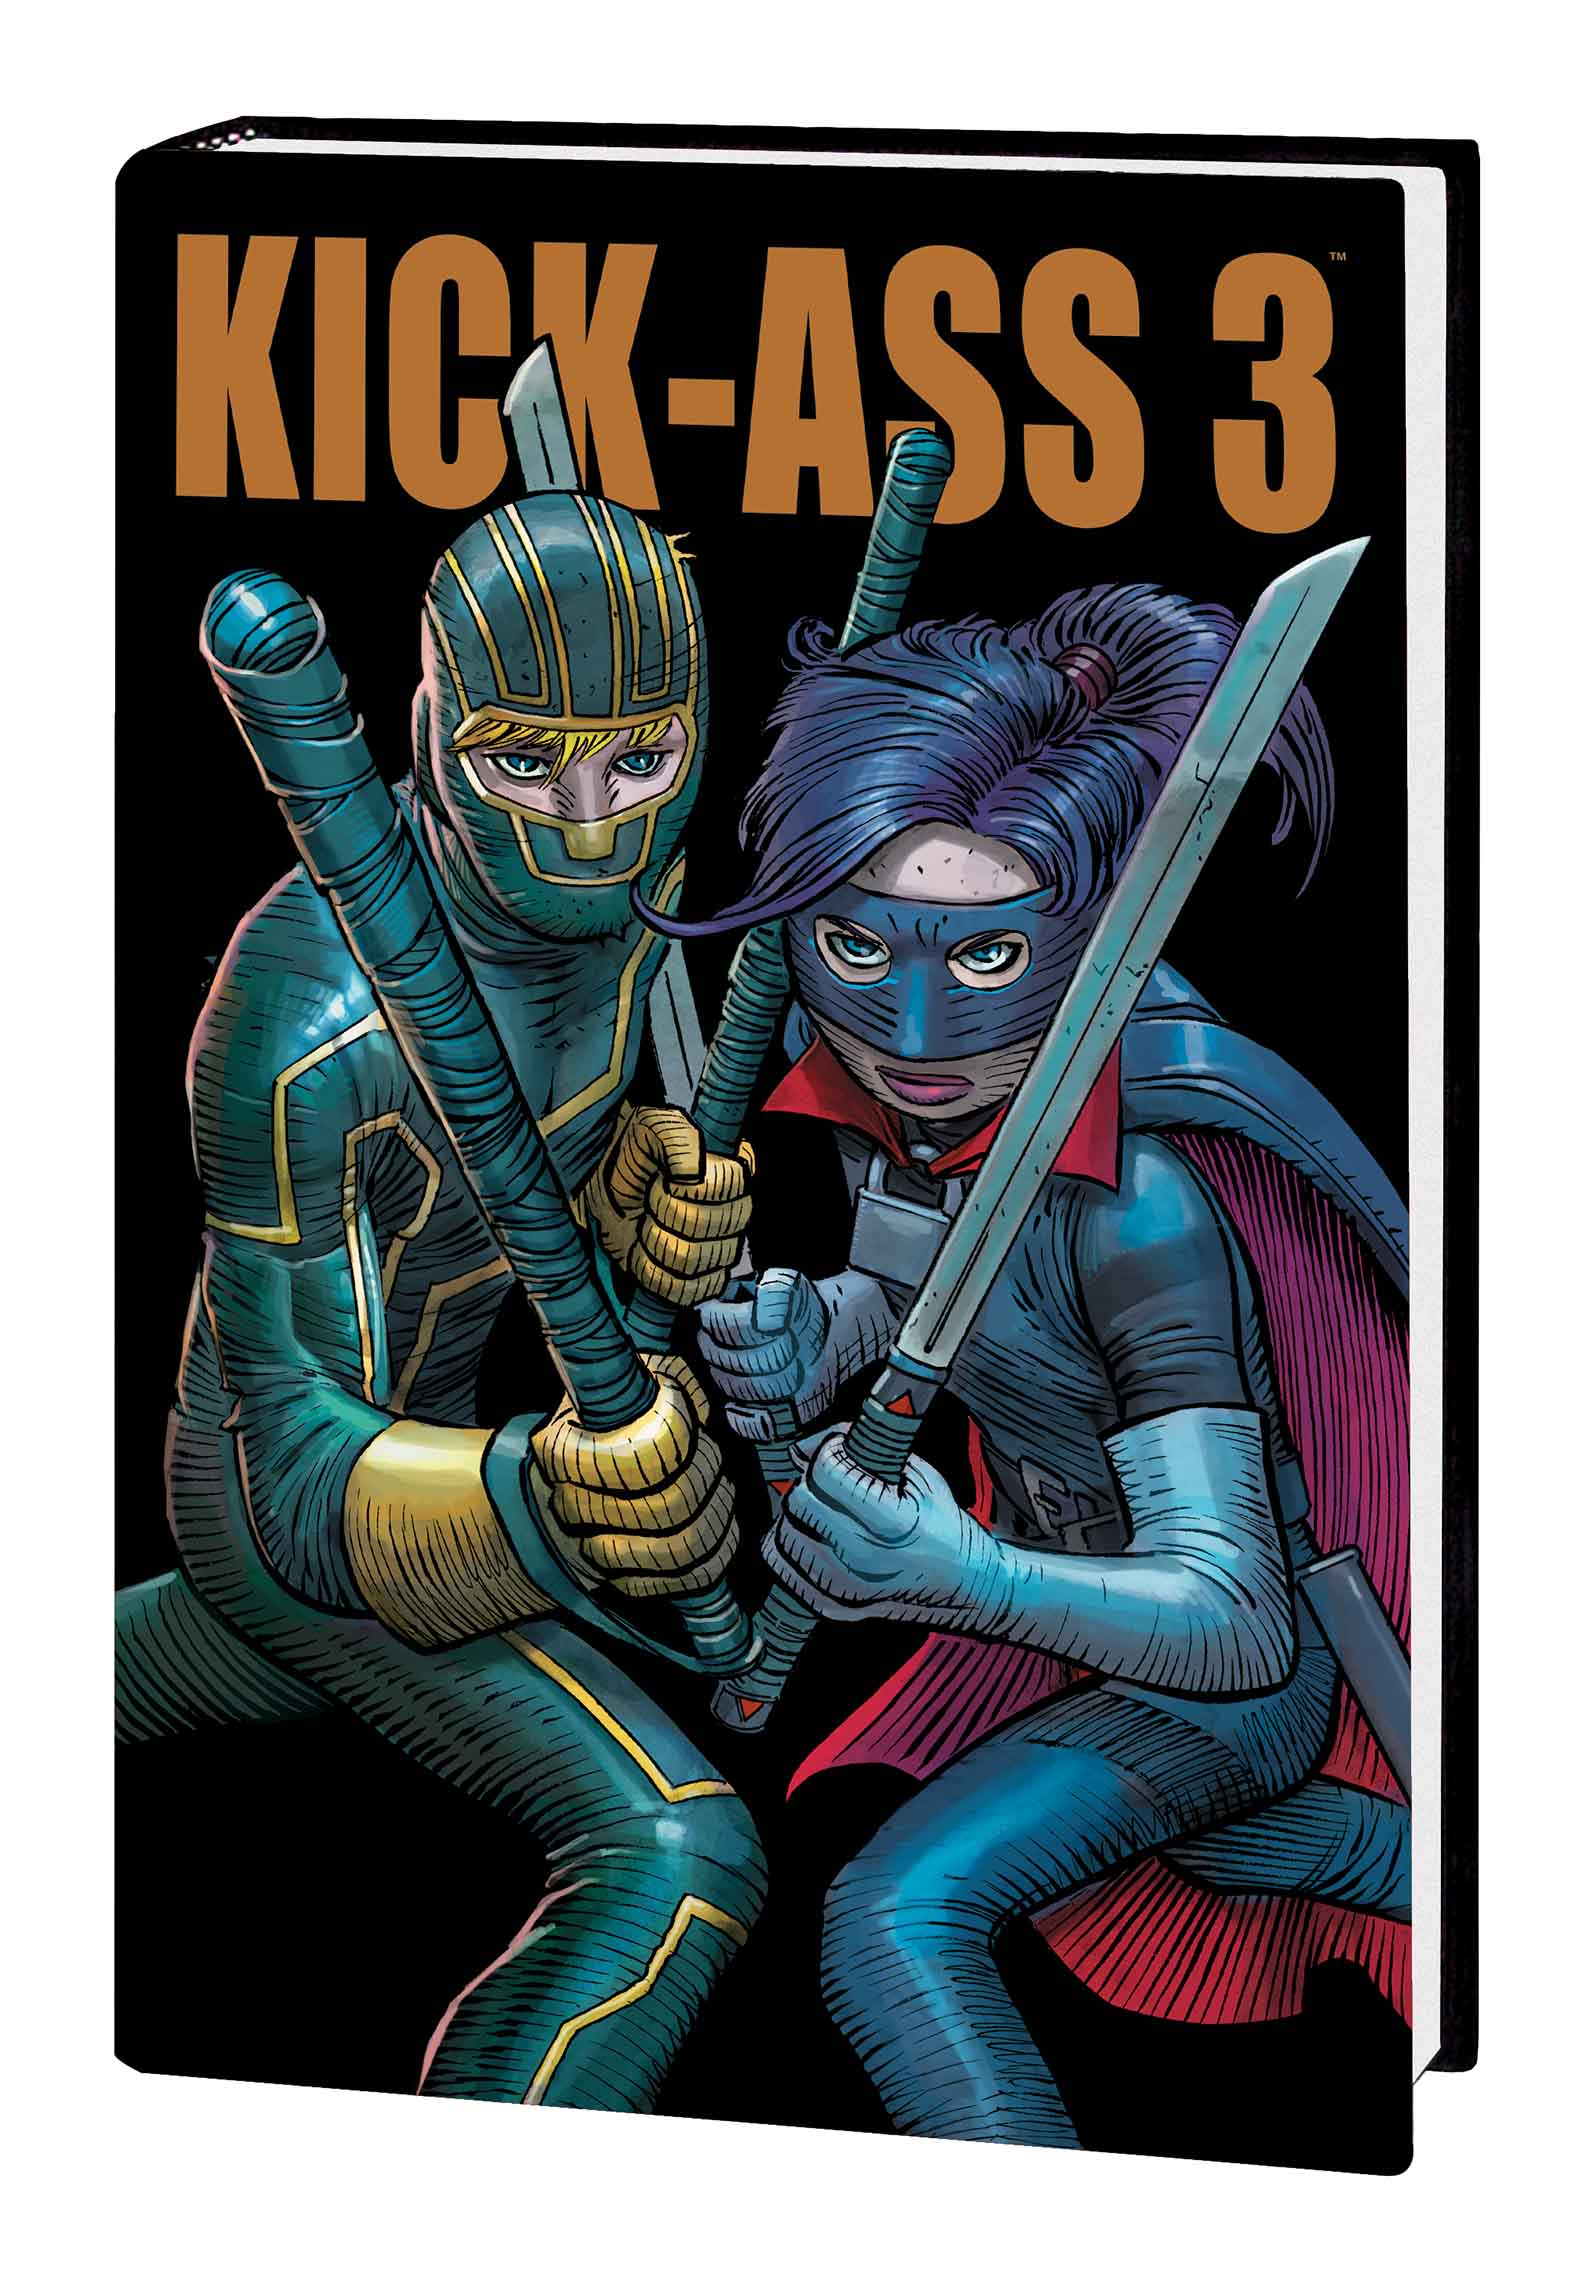 2013 Kick Ass 3 #1 COMPLETE SET of ALL 6 Covers Marvel Icon MOVIE Millar